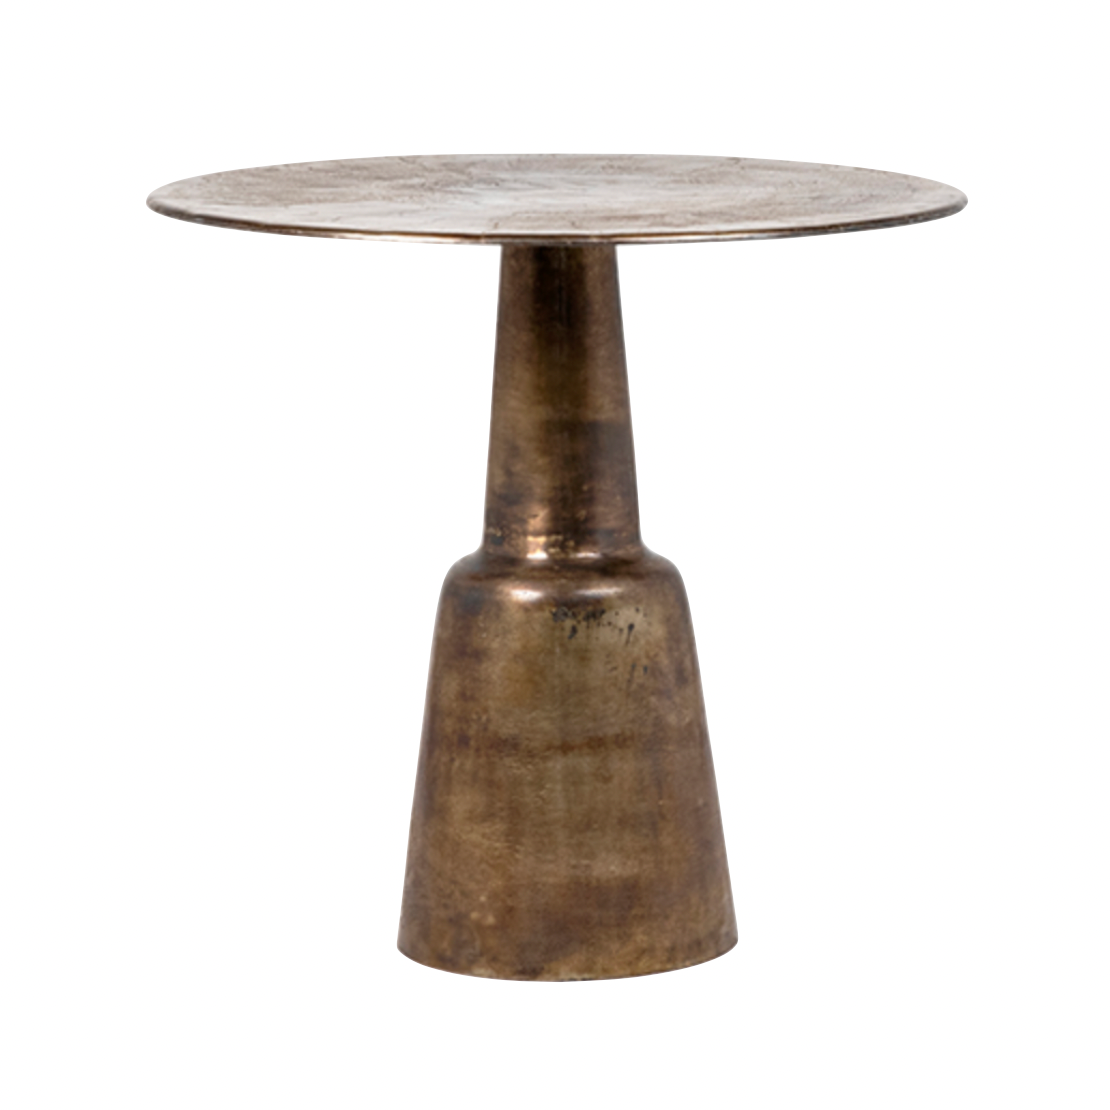 Made from cast aluminum in a vintage brass antique finish, this Golbez Bistro Table brings an antique, rustic appeal to any dining room or kitchen area.  Cast Aluminum Vintage Brass Antique Finish Size: 32"l x 32"d x 30"h 